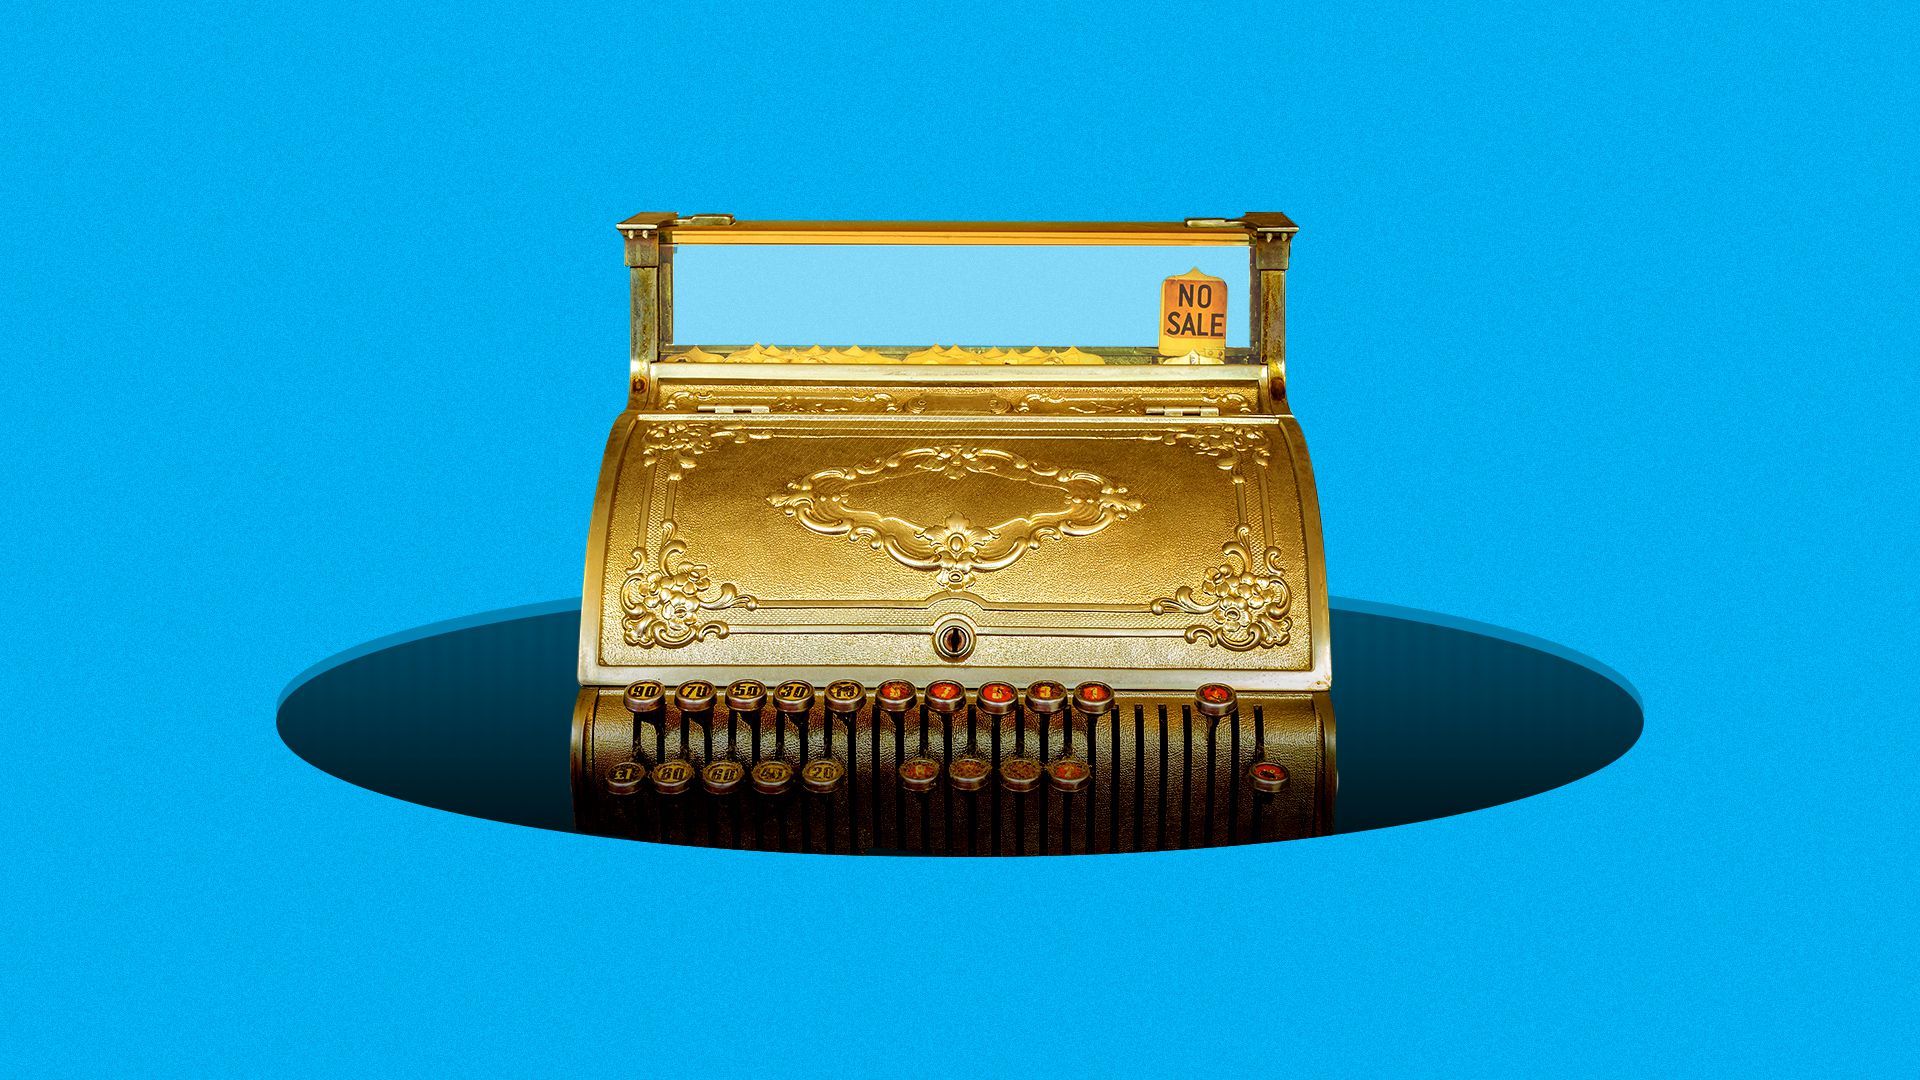 Illustration of a cash register in a hole.   